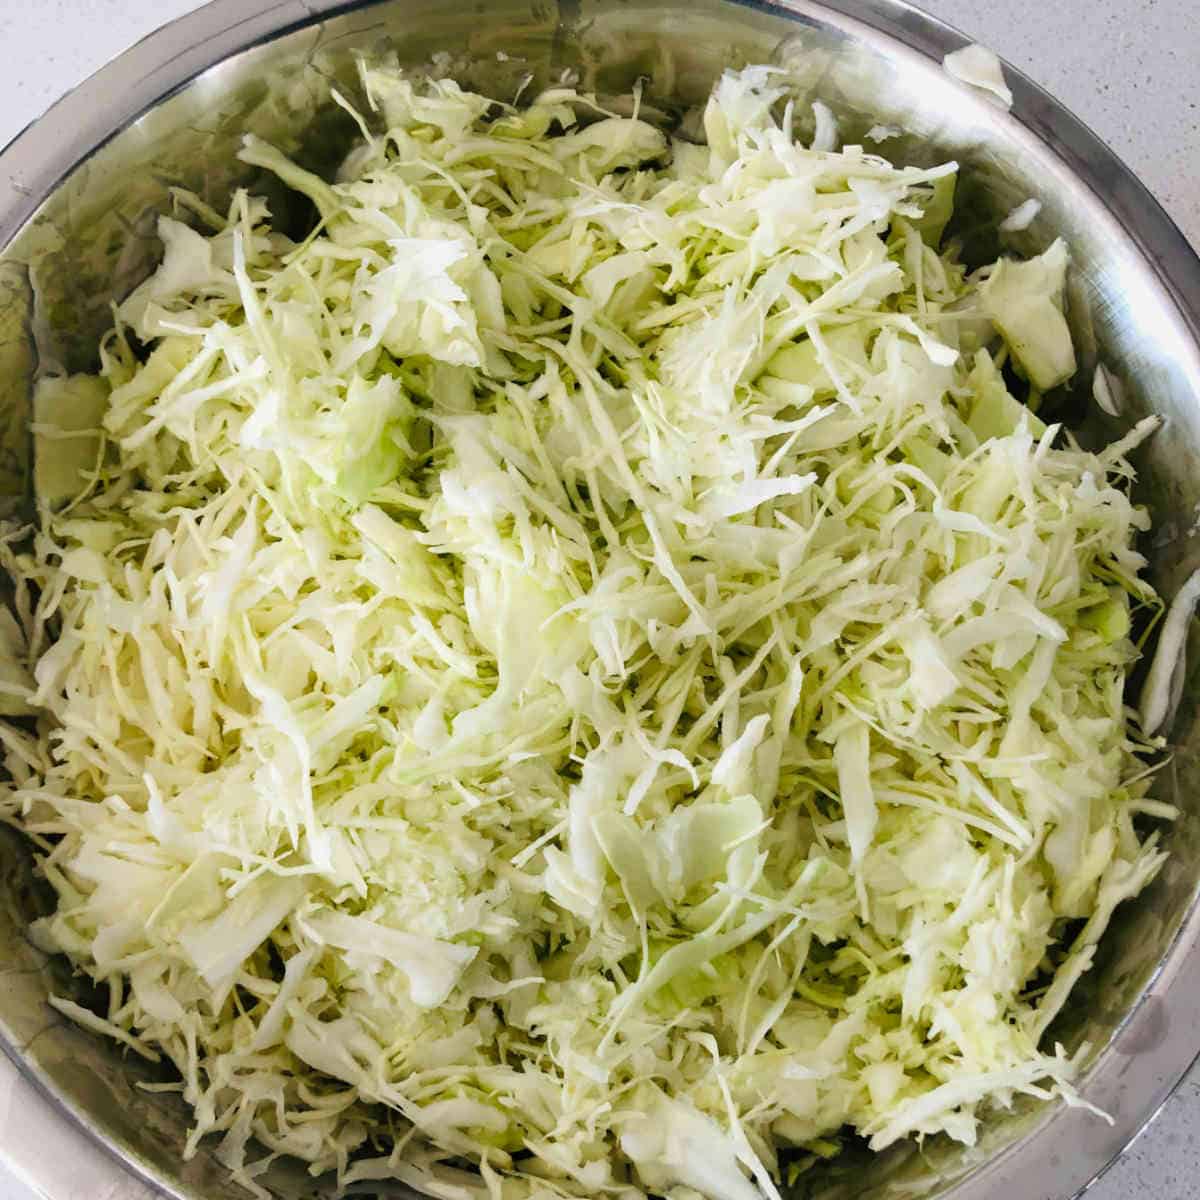 Cut or shred the cabbage finely.